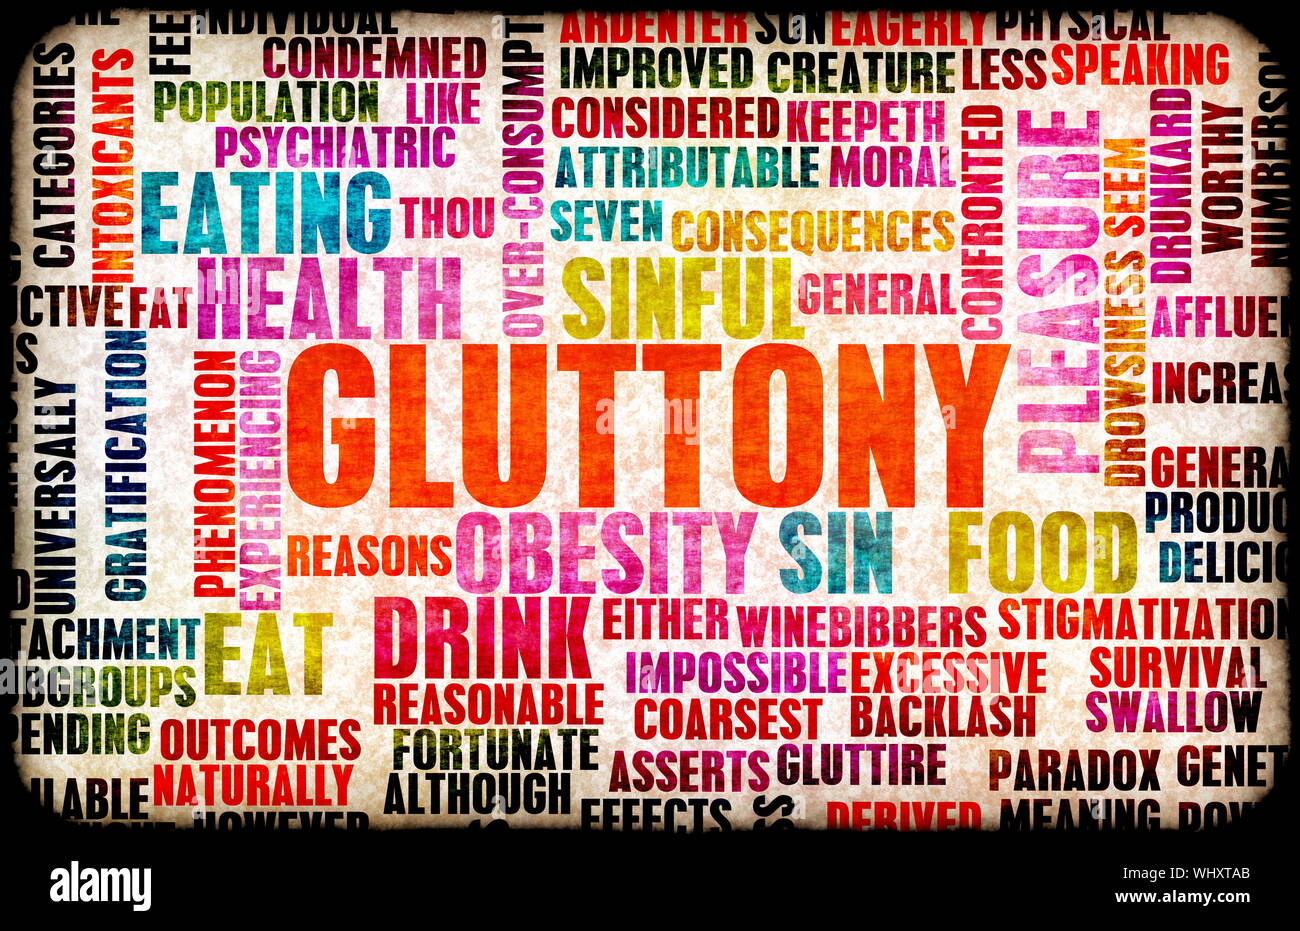 Gluttony one of the Seven Deadly Sins Concept Stock Photo